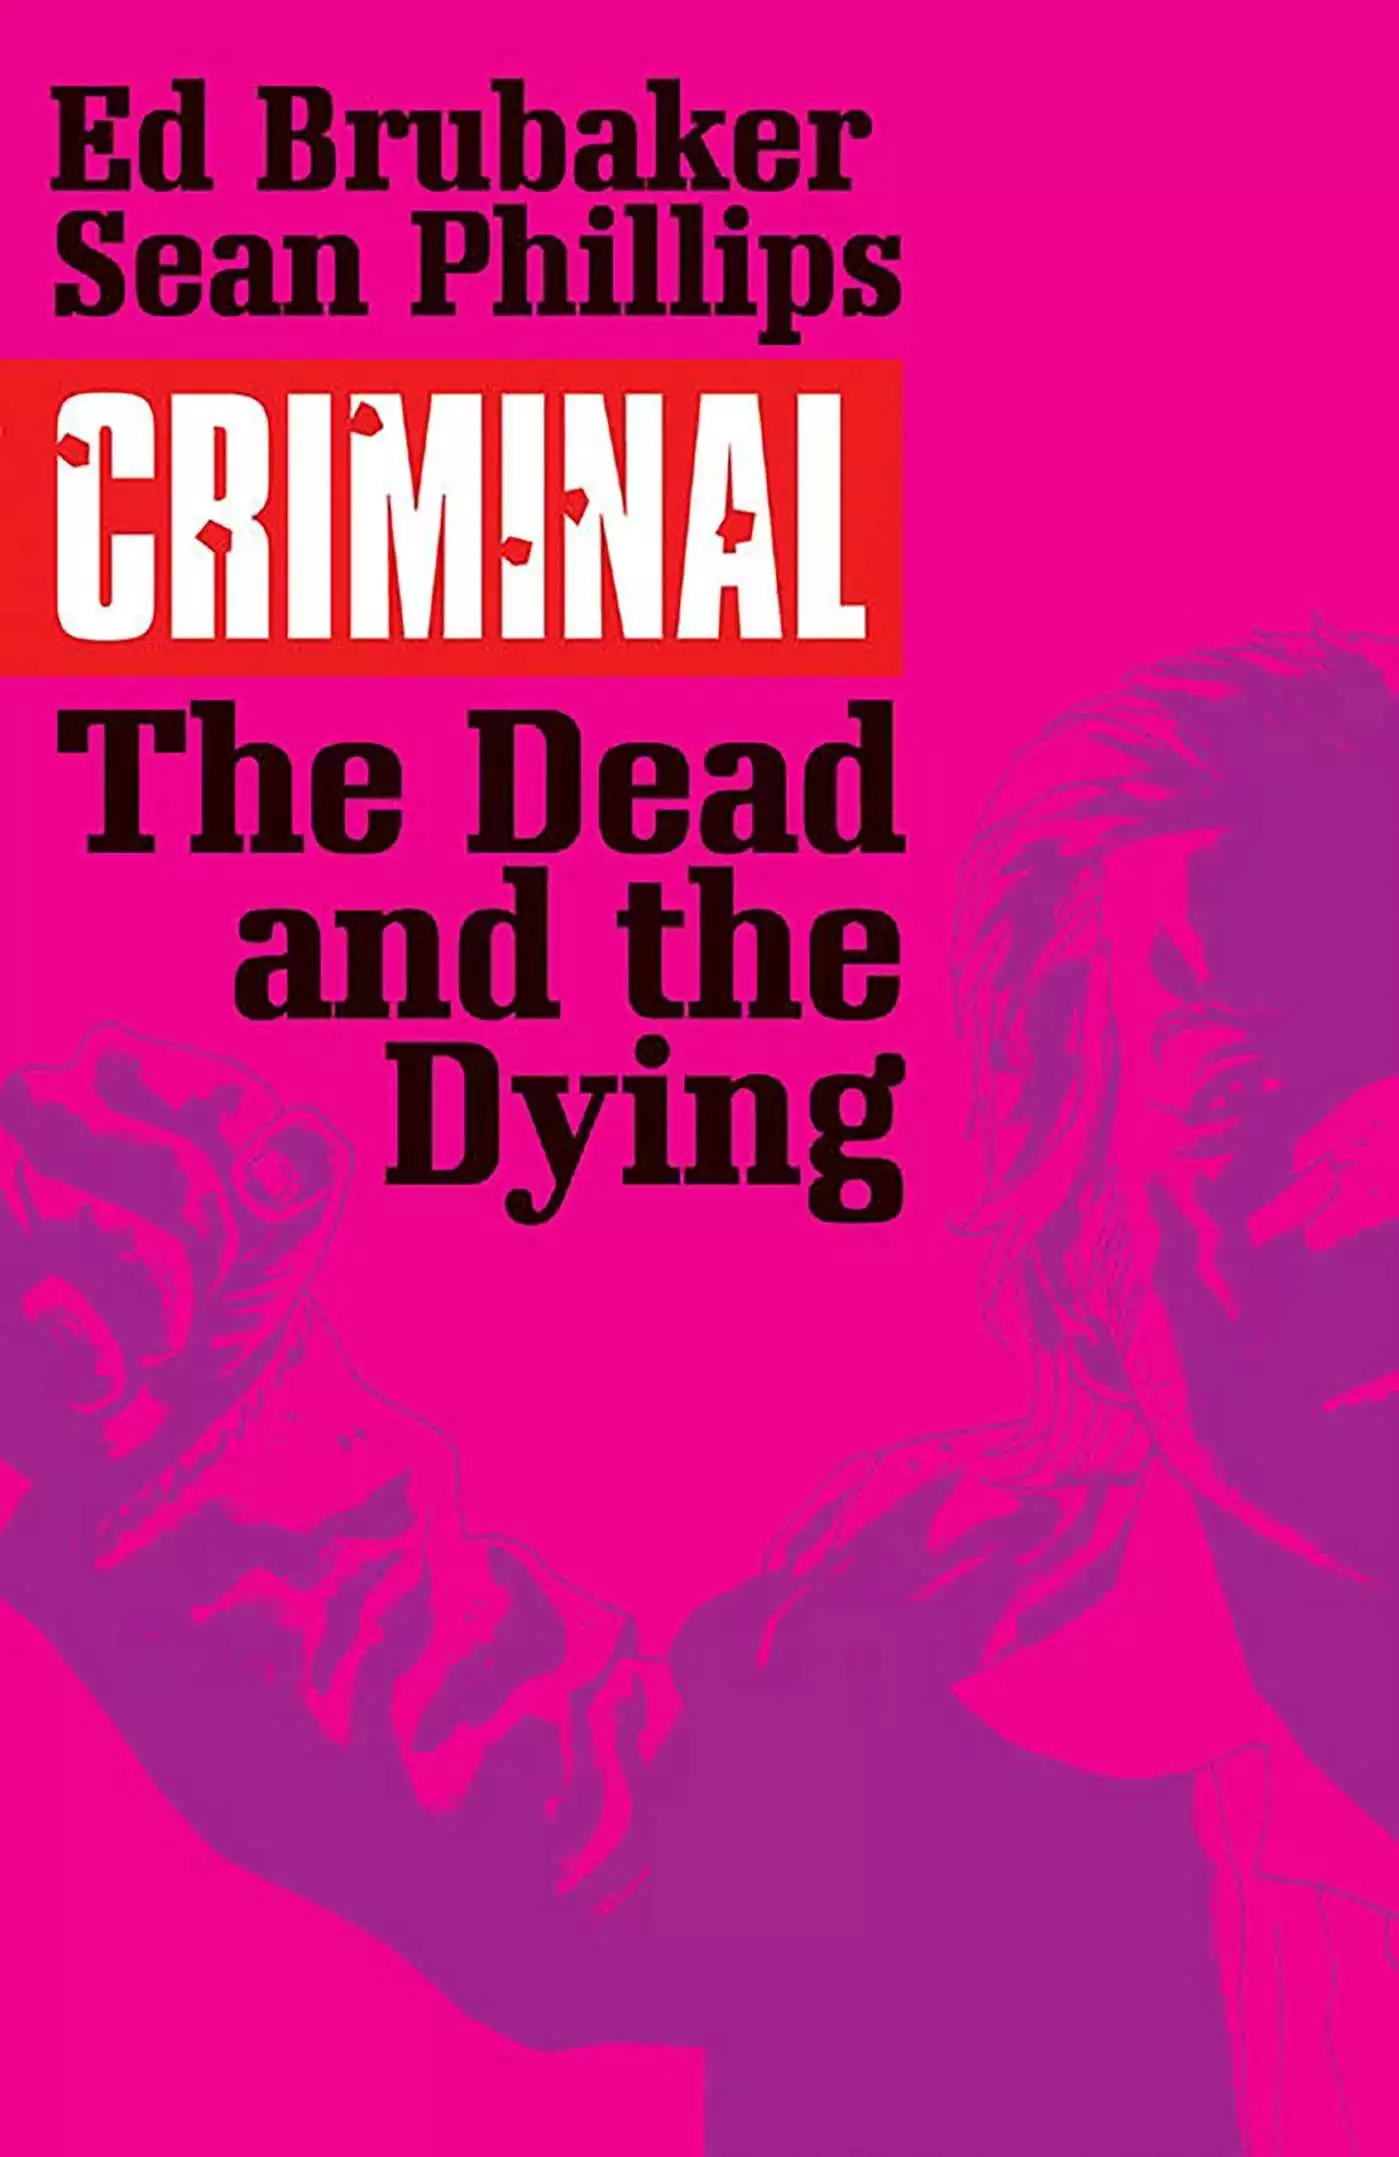 Criminal Volume 3: The Dead and the Dying